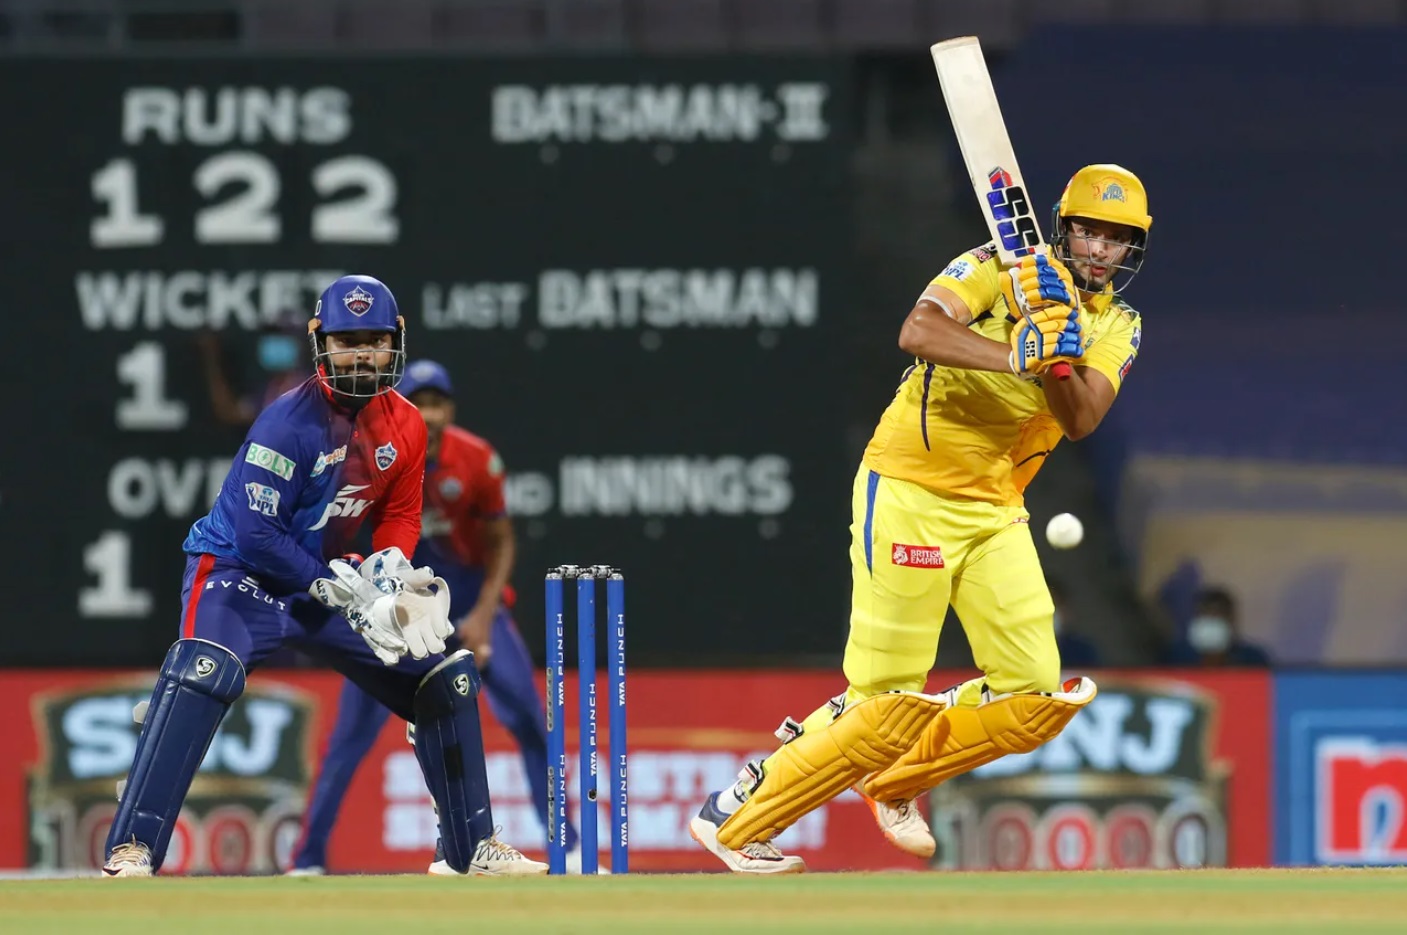 IPL 2022, CSK vs DC | Twitter reacts as Shivam Dube silences commentators after being promoted by MS Dhoni